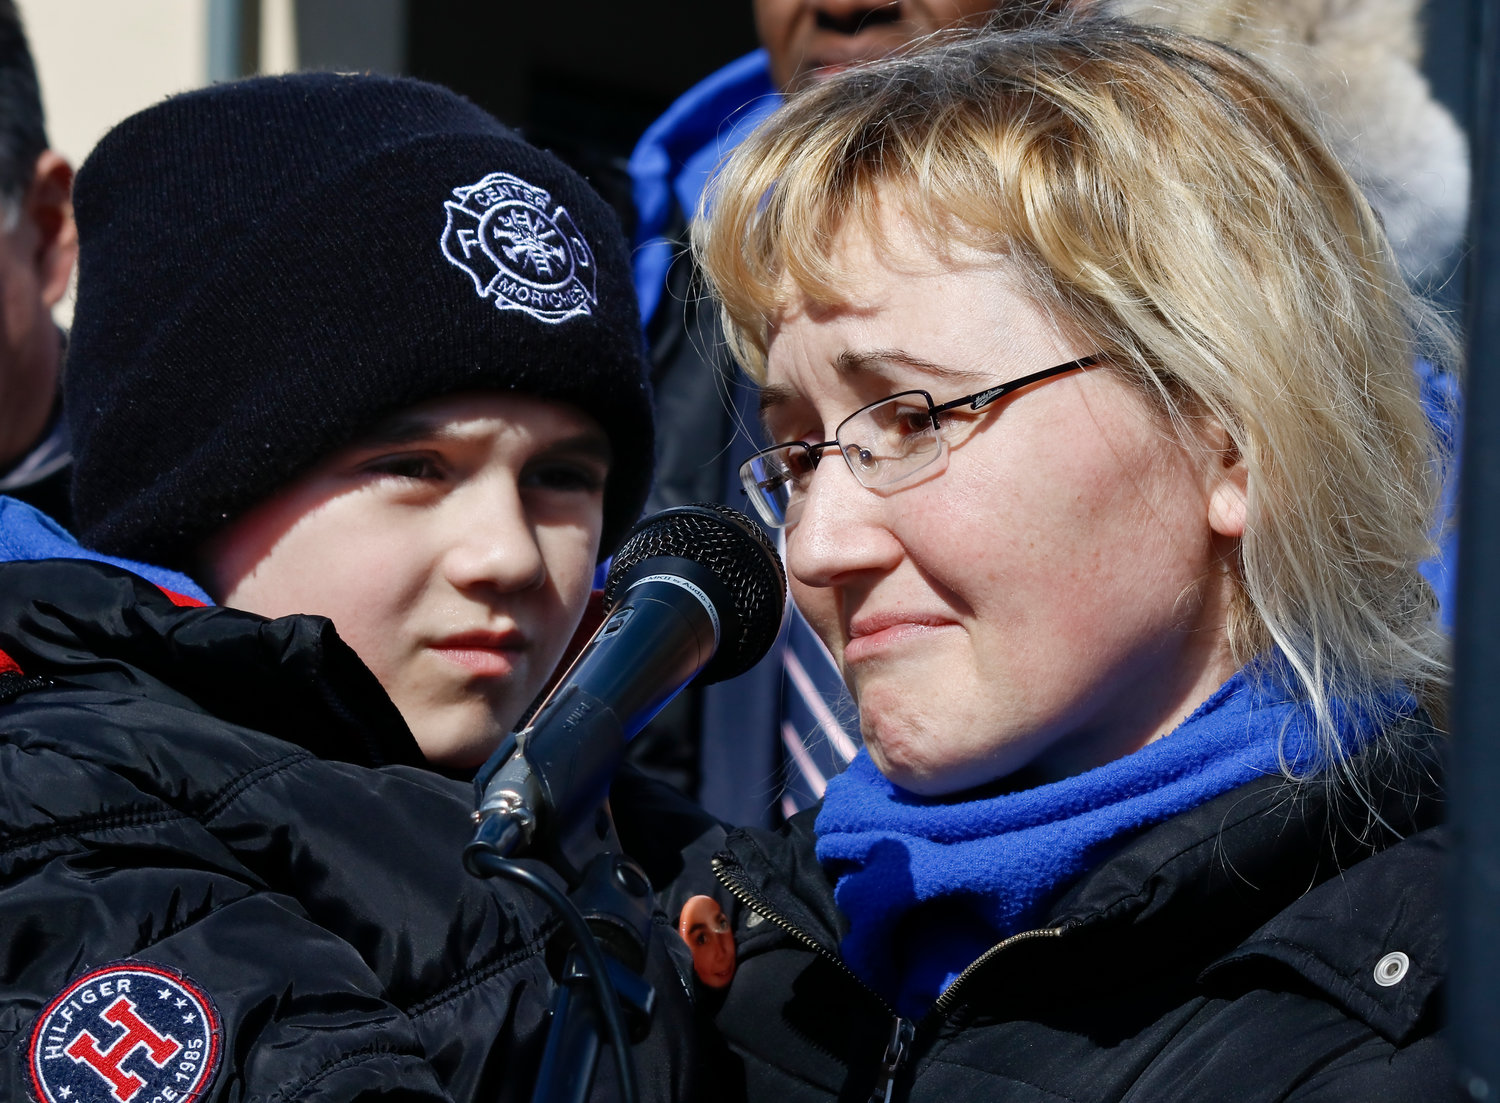 Thomas Valva's mother, Justyna Zubko-Valva, who lives in Valley Stream, tearfully delivered a speech thanking those in attendance at ceremony in March honoring of her late son. With her was Thomas's brother, Andrew.